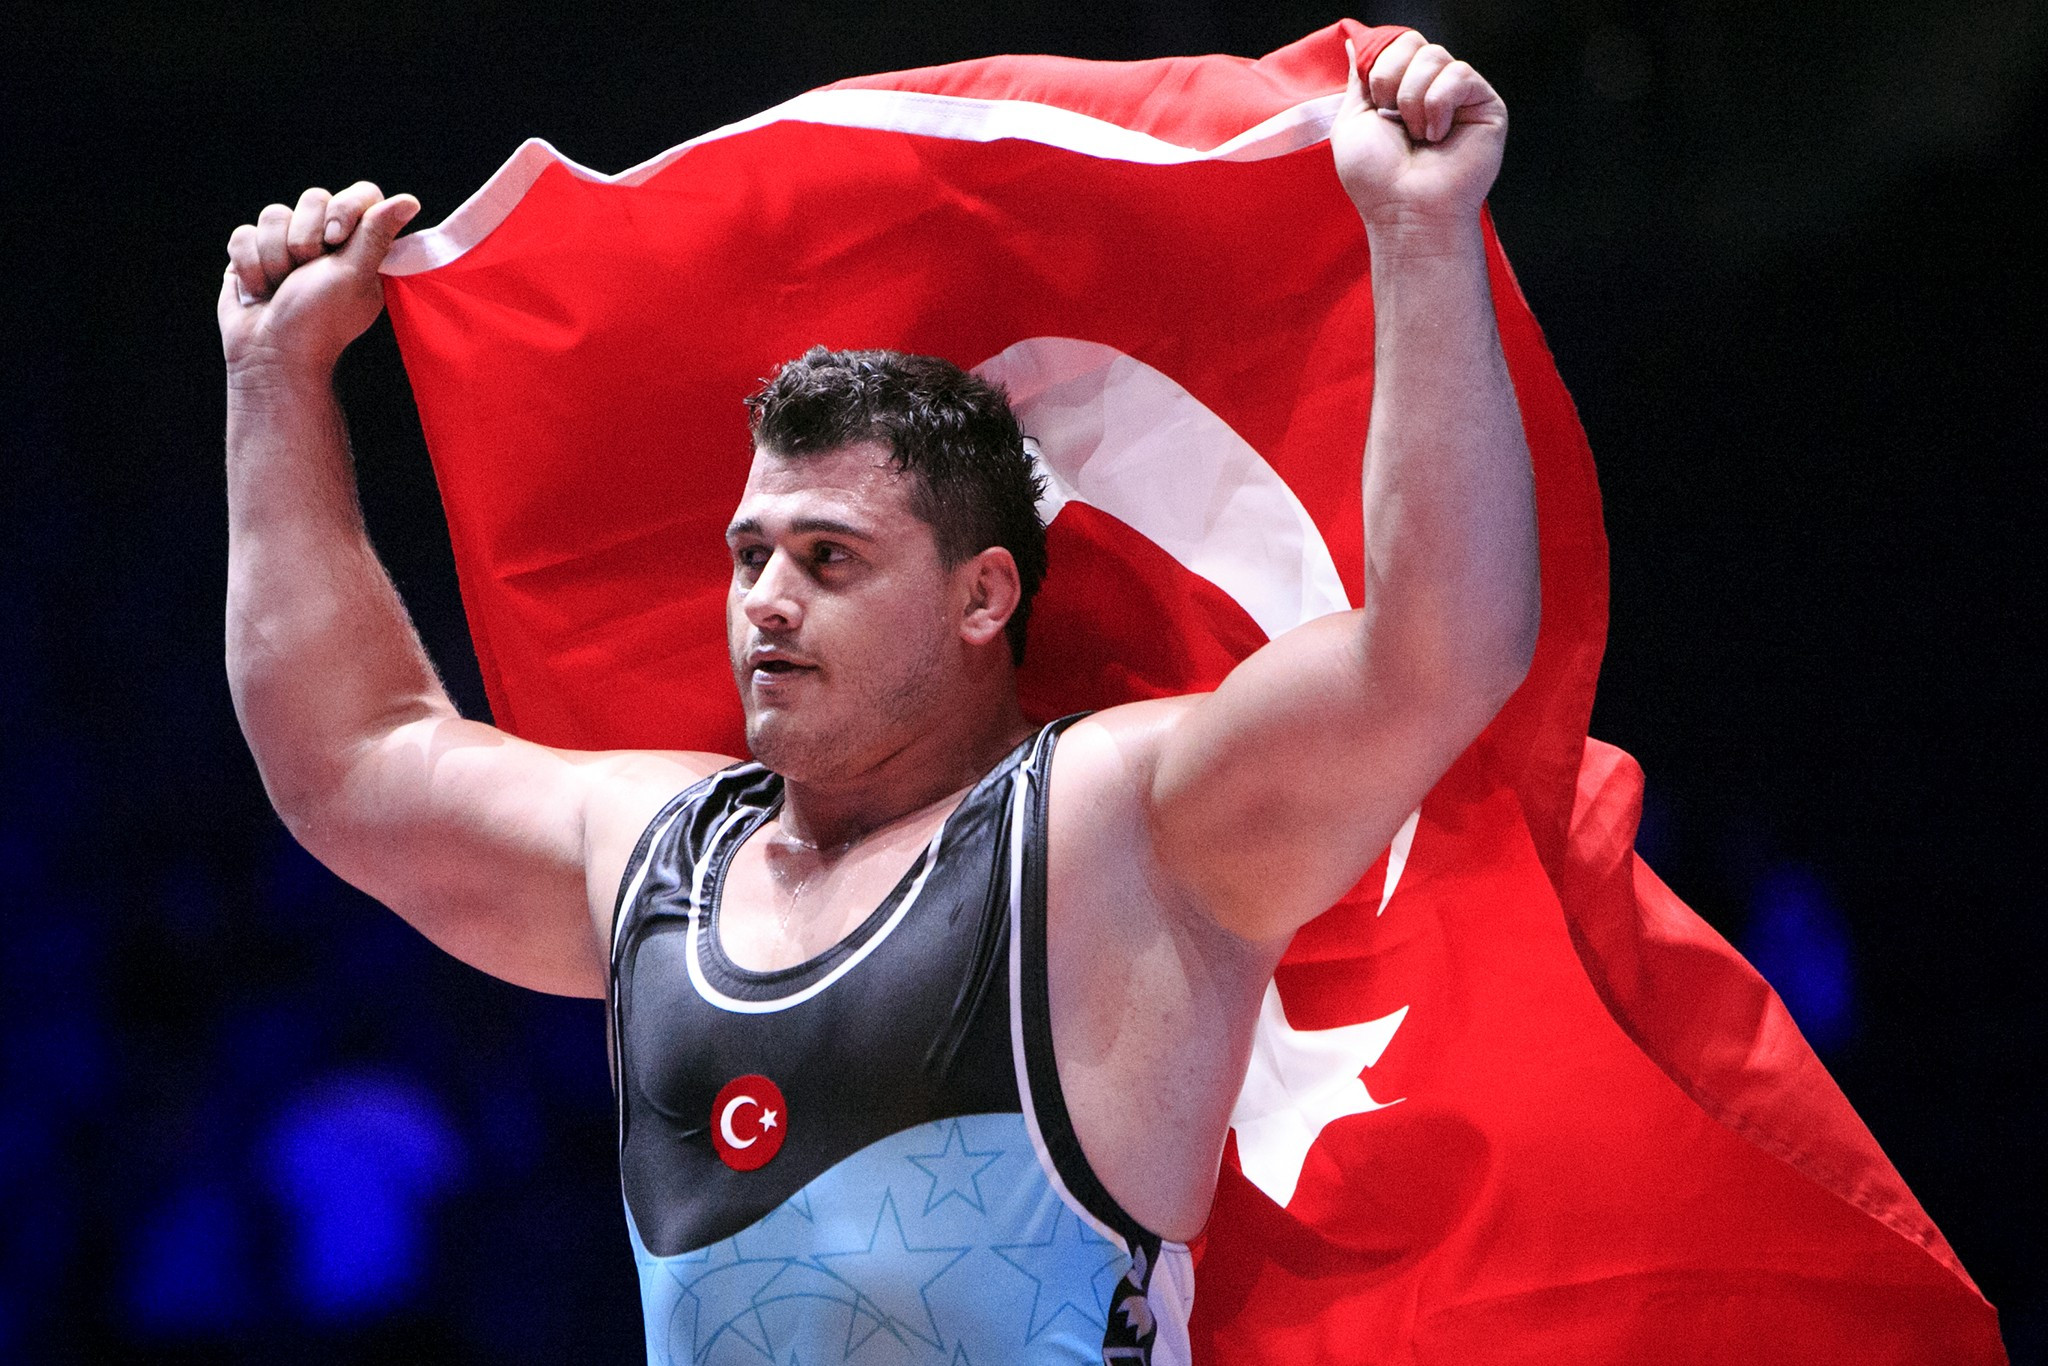 Riza Kayaalp of Turkey was among the star perforners on day two ©UWW